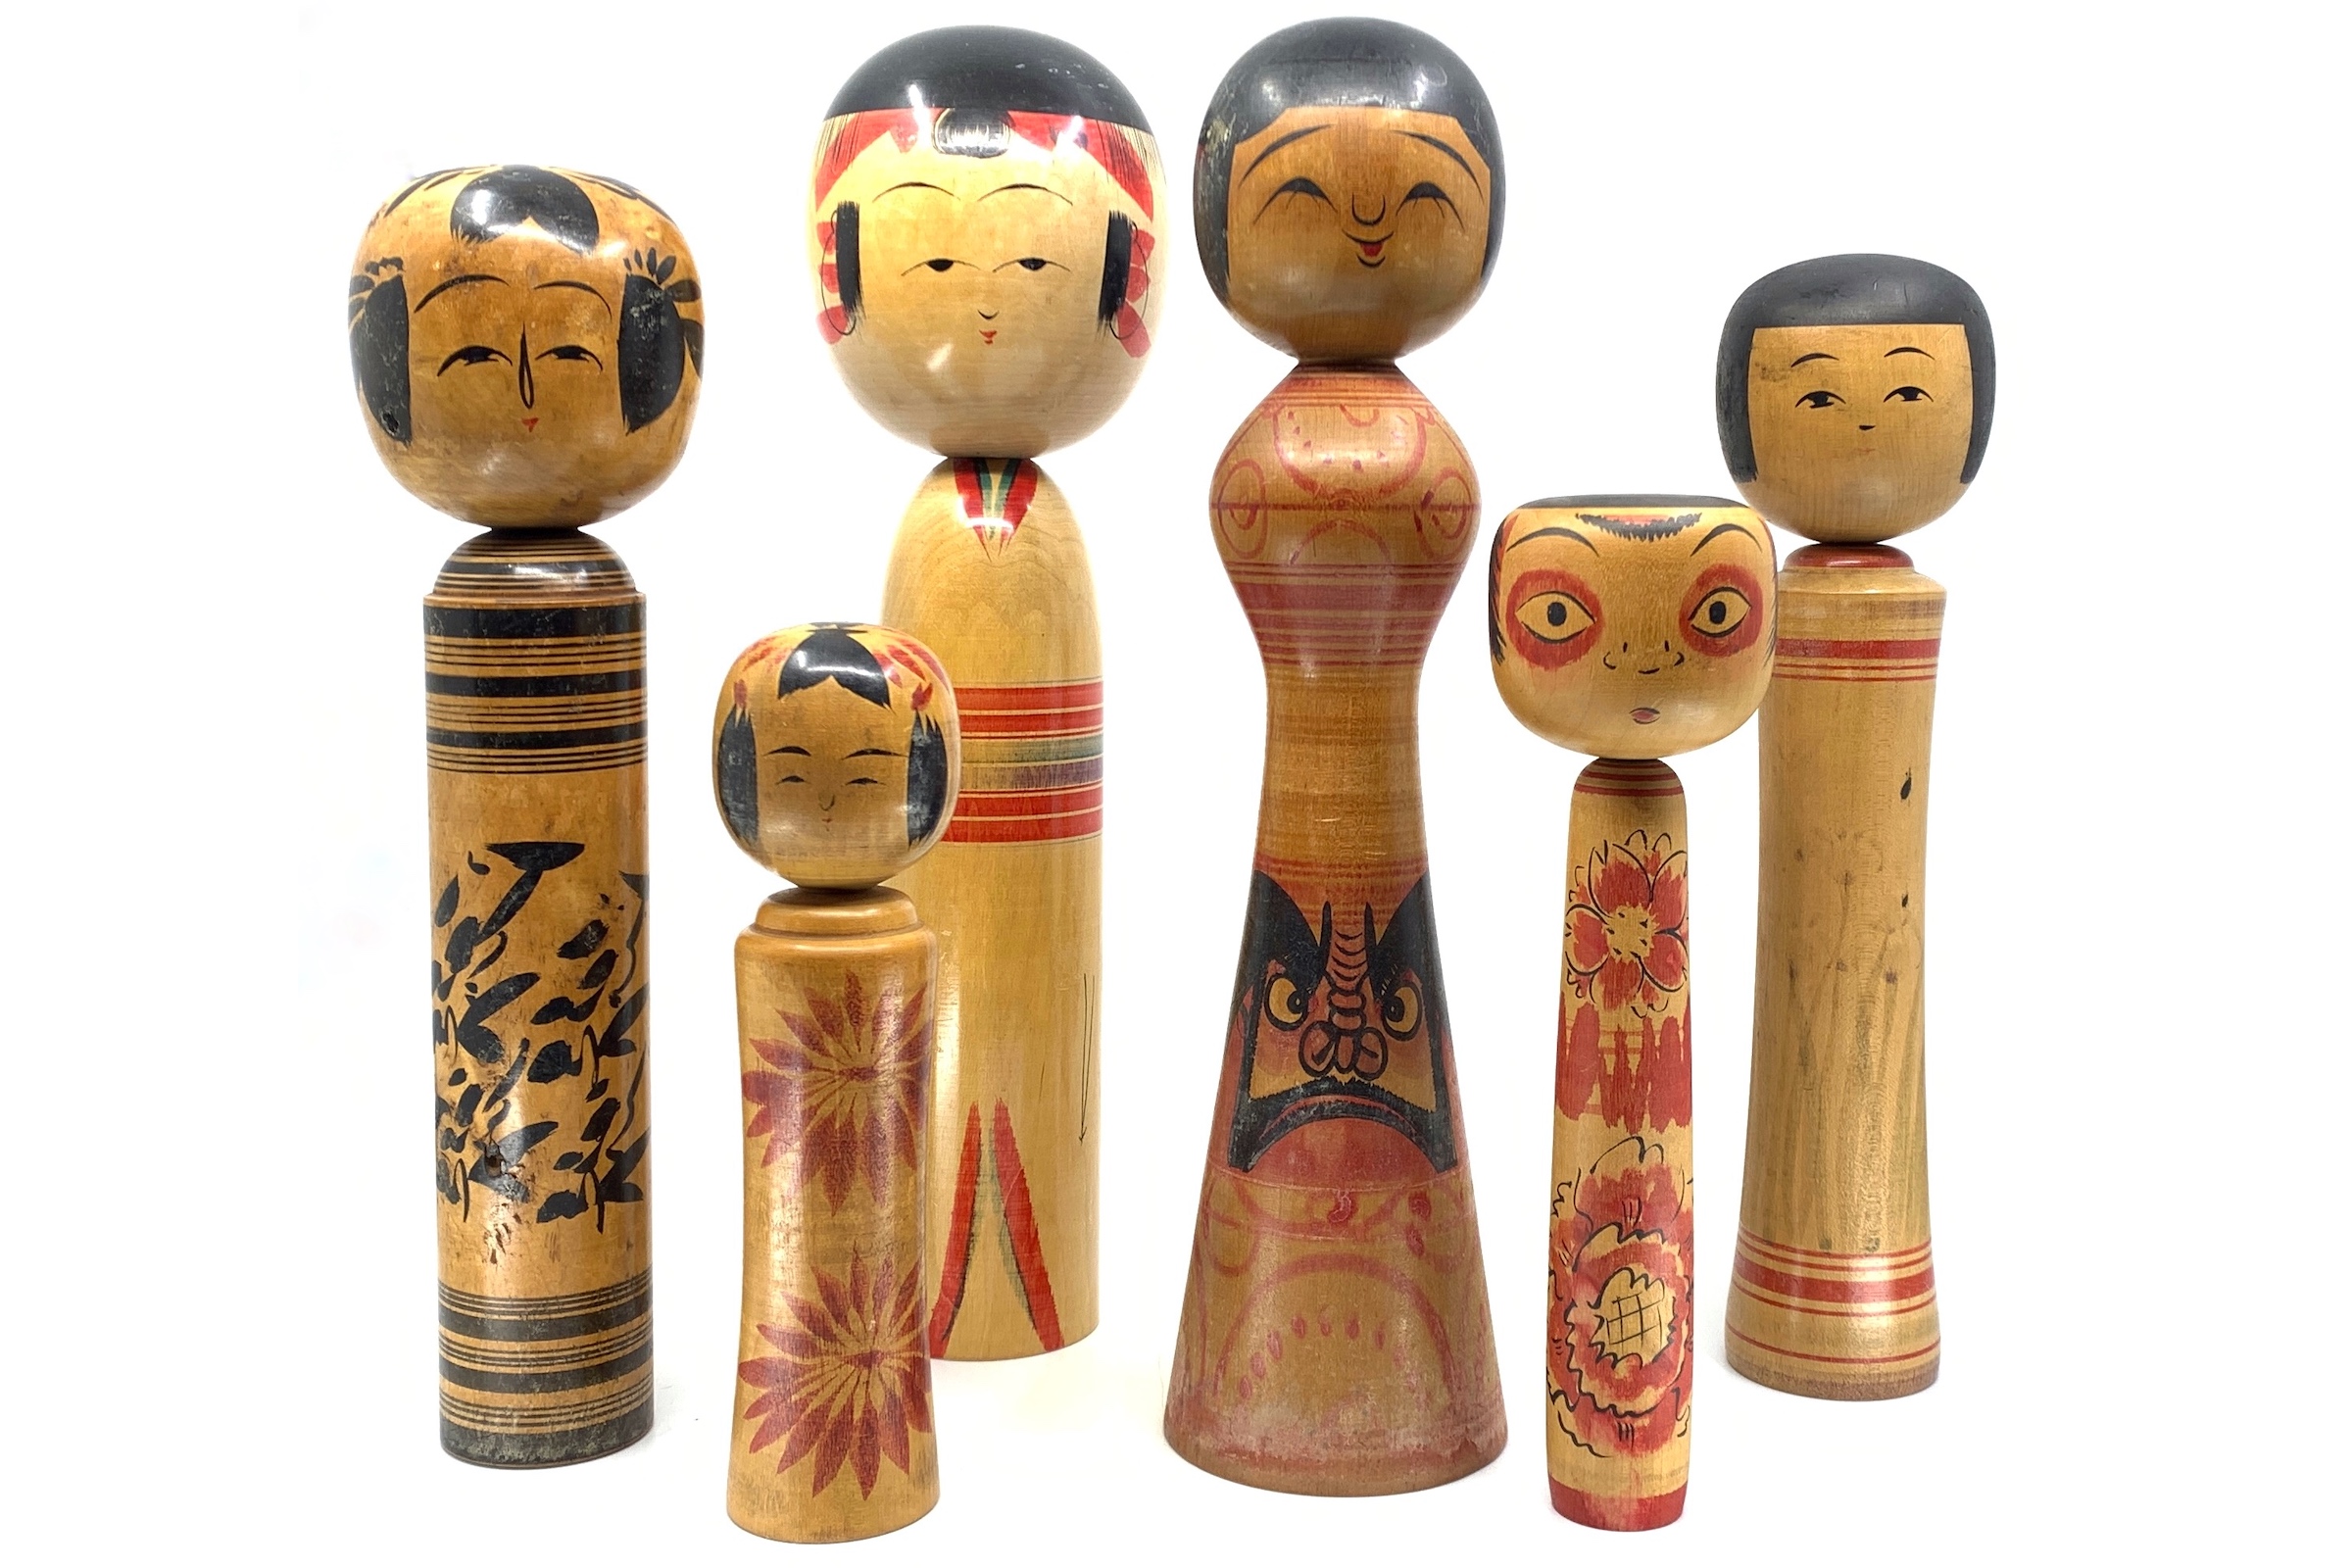 Traditional Style Vintage Japanese Kokeshi Wooden Dolls sold Separately 